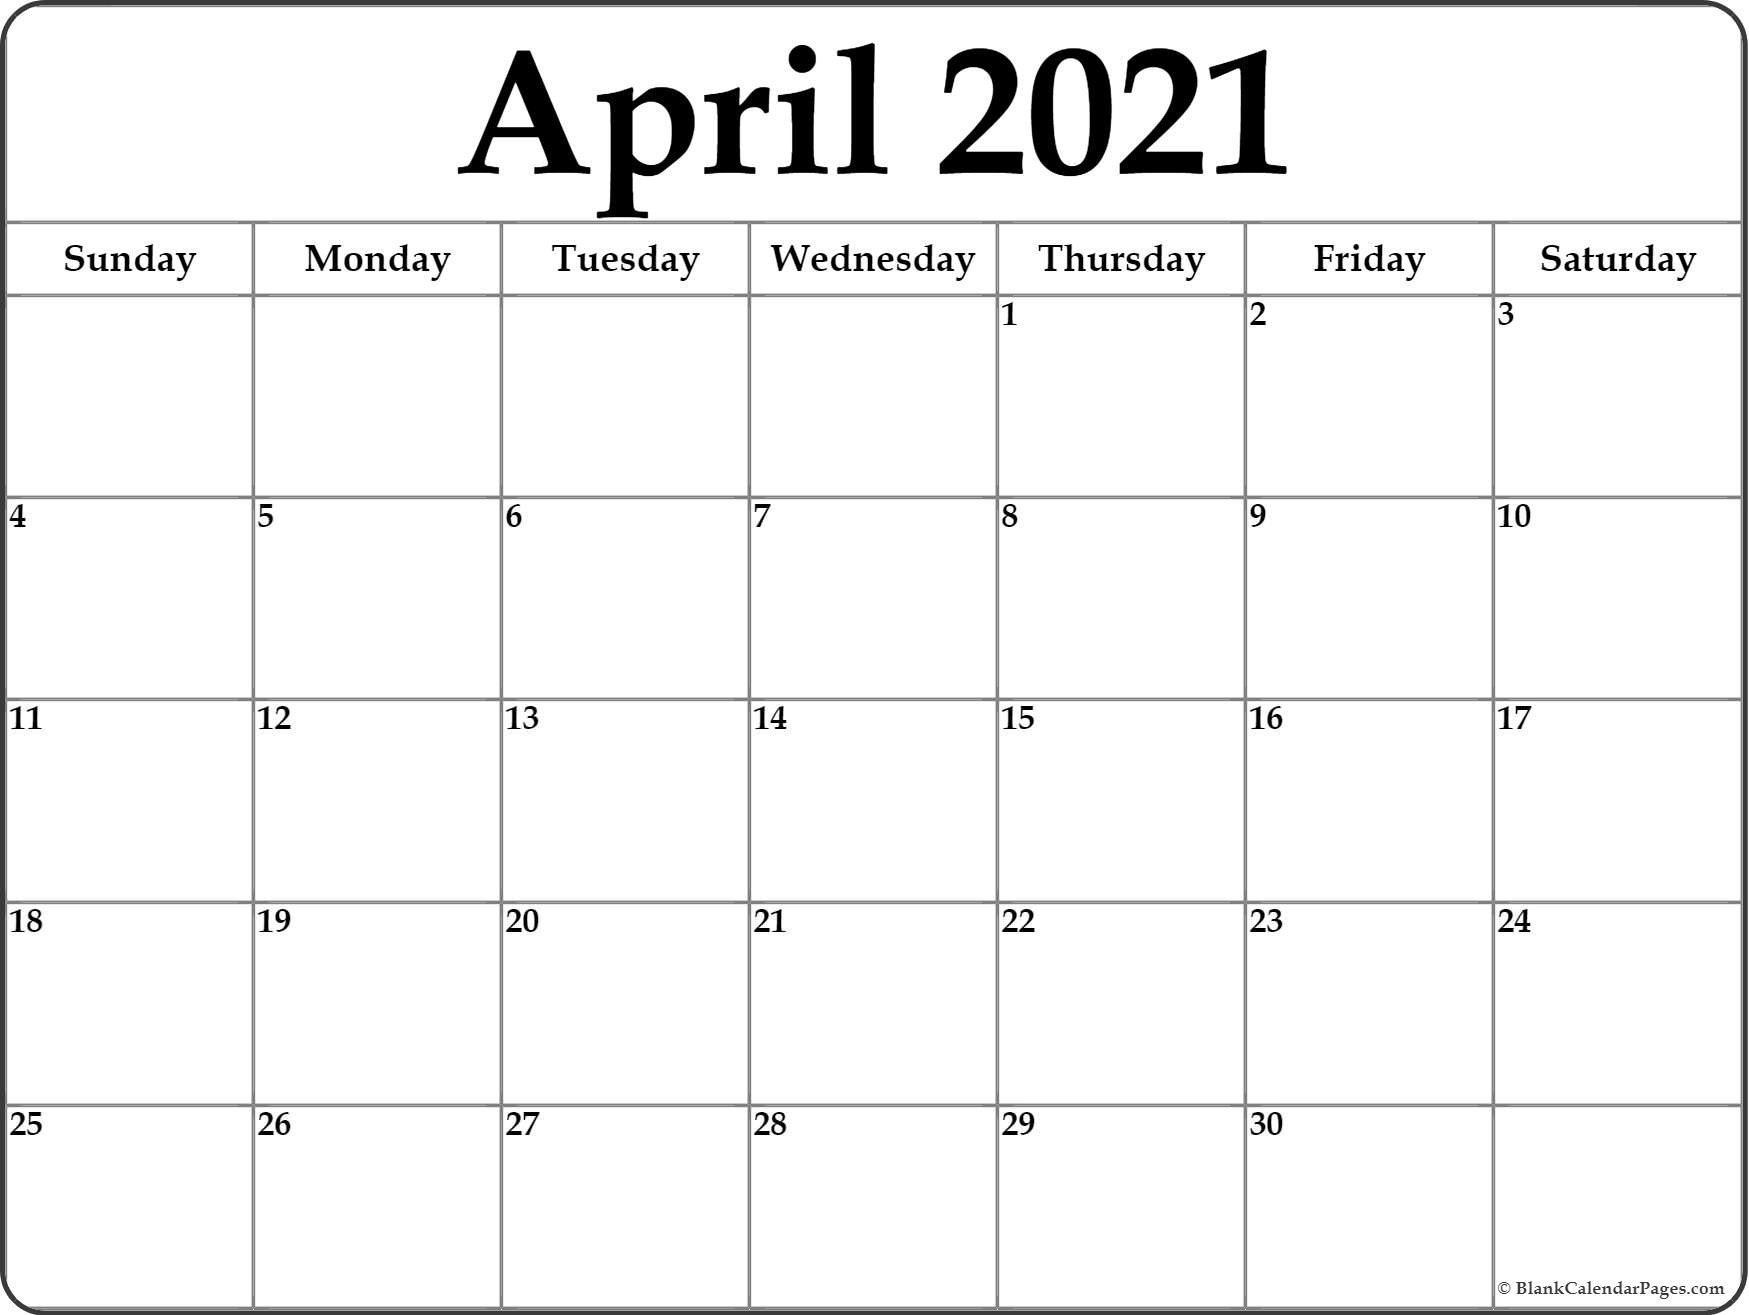 Get April And May Clanedr2021